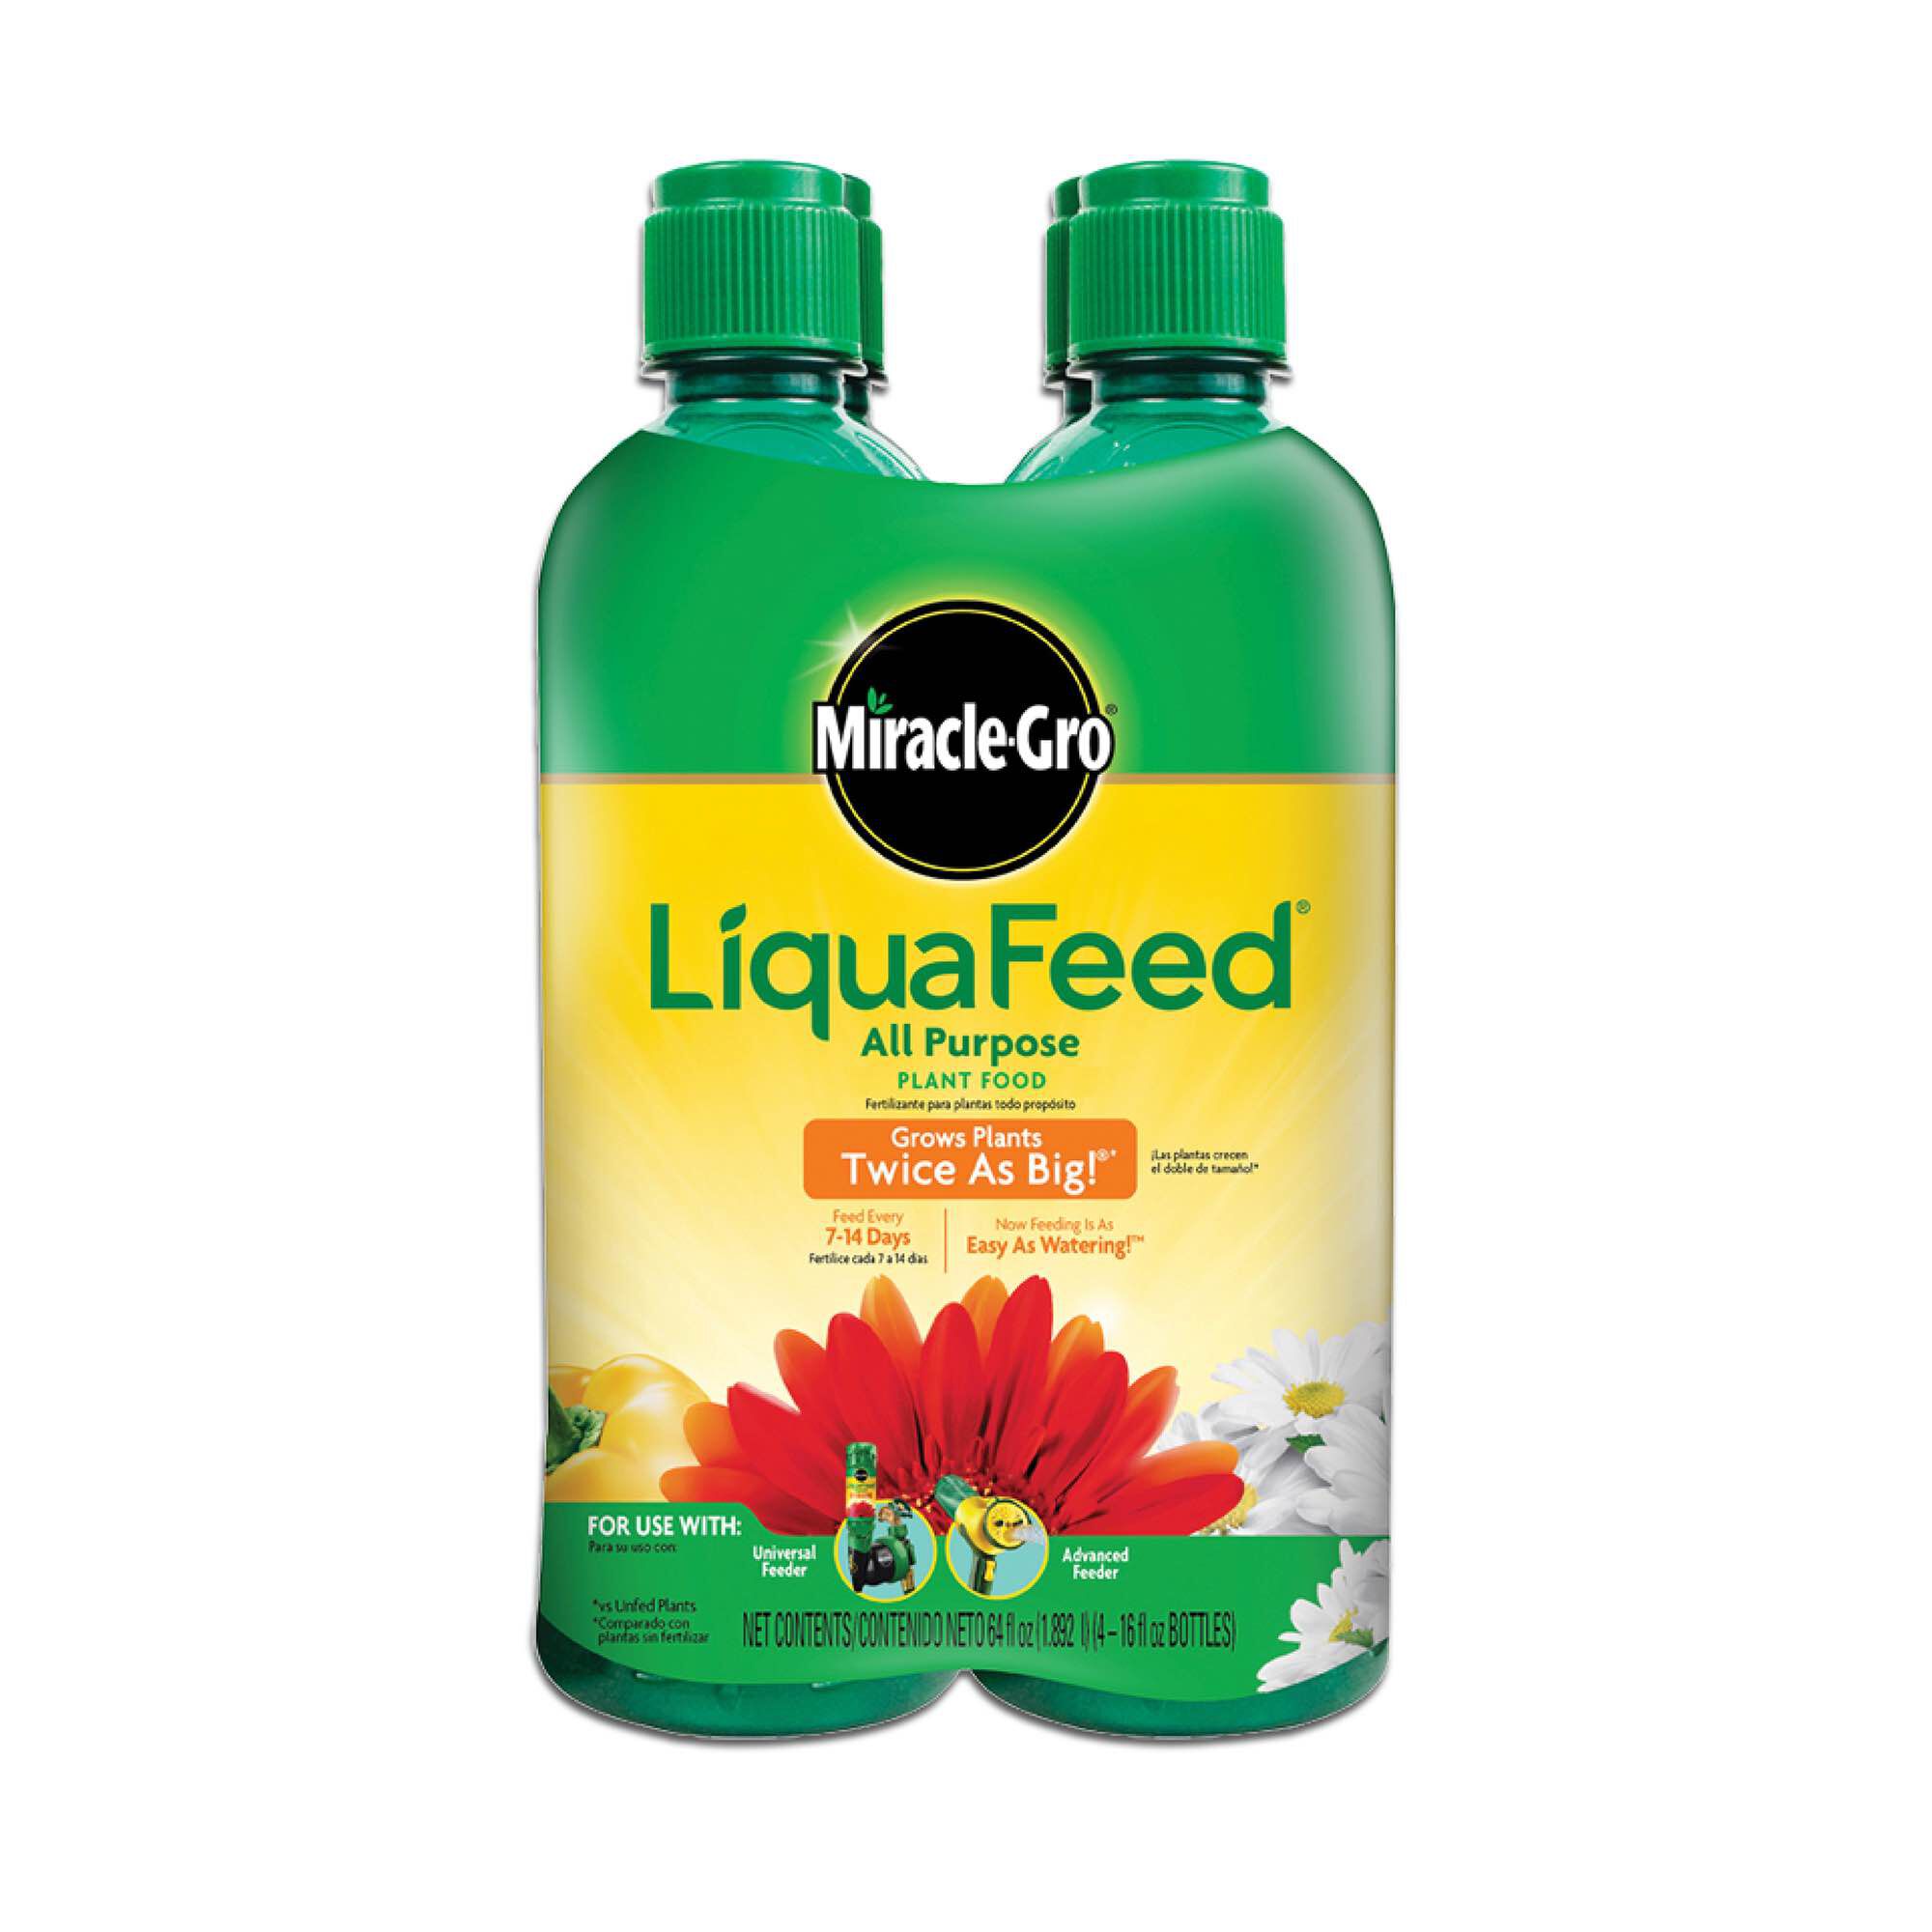 Image of Vegetable garden fertilized with Miracle-Gro LiquaFeed